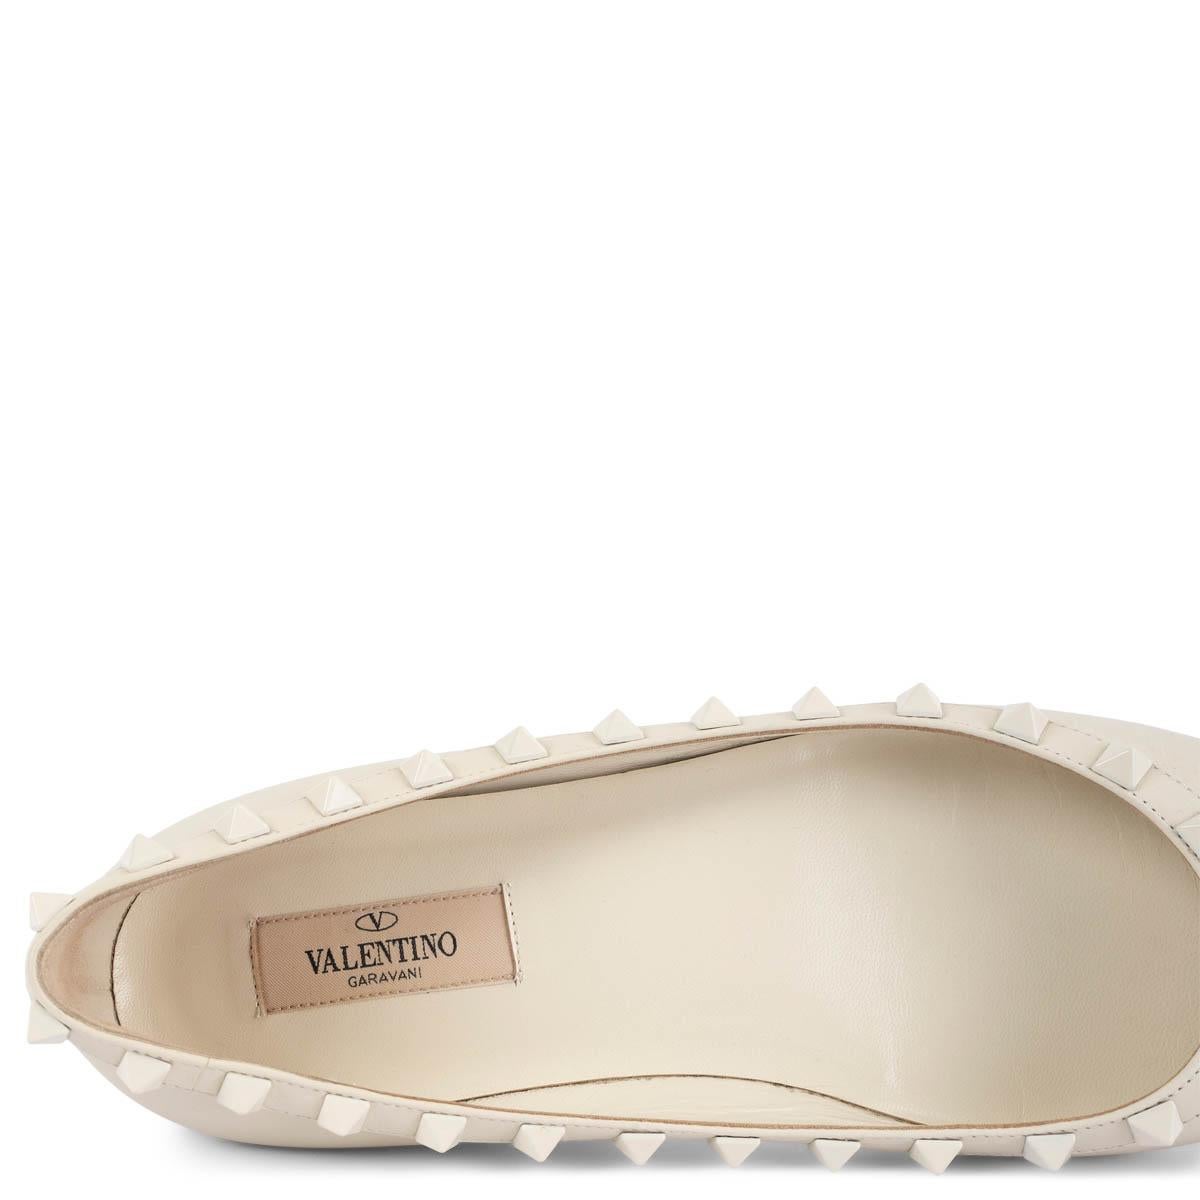 VALENTINO ivory leather ROCKSTUD Pointed Toe Ballet Flats Shoes 39 For Sale 2